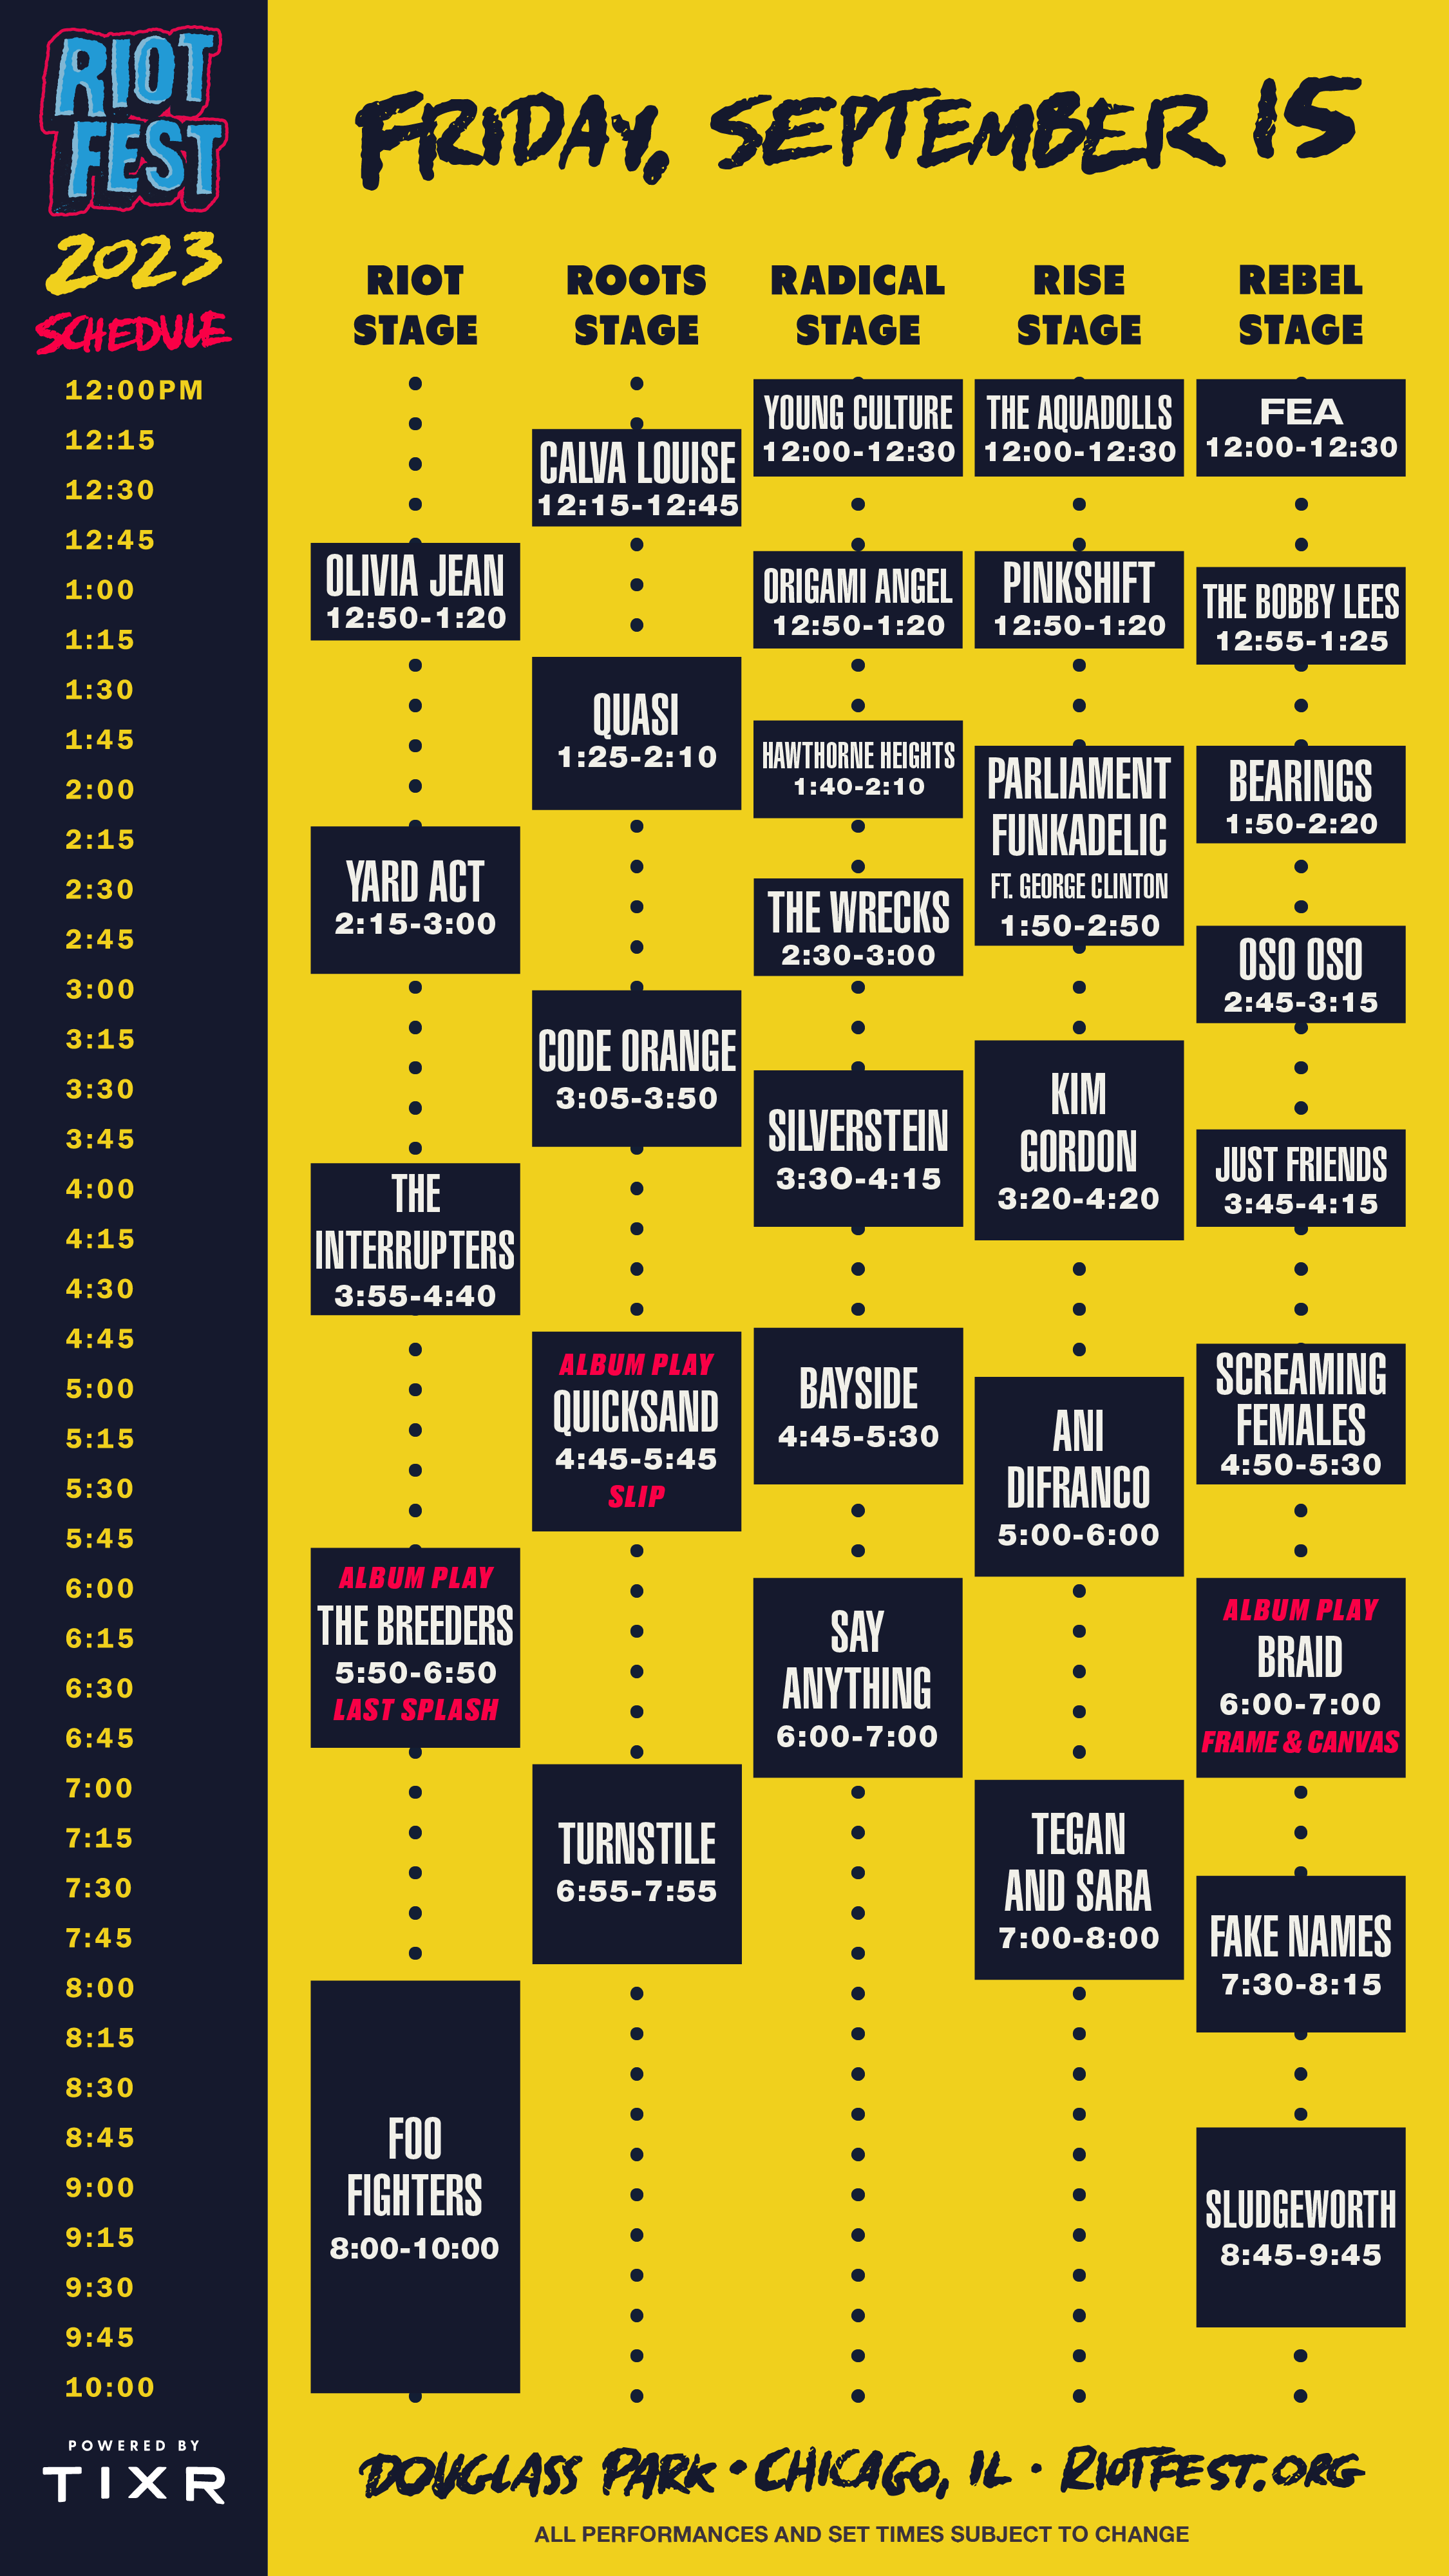 Friday band schedule for Riot Fest 2023